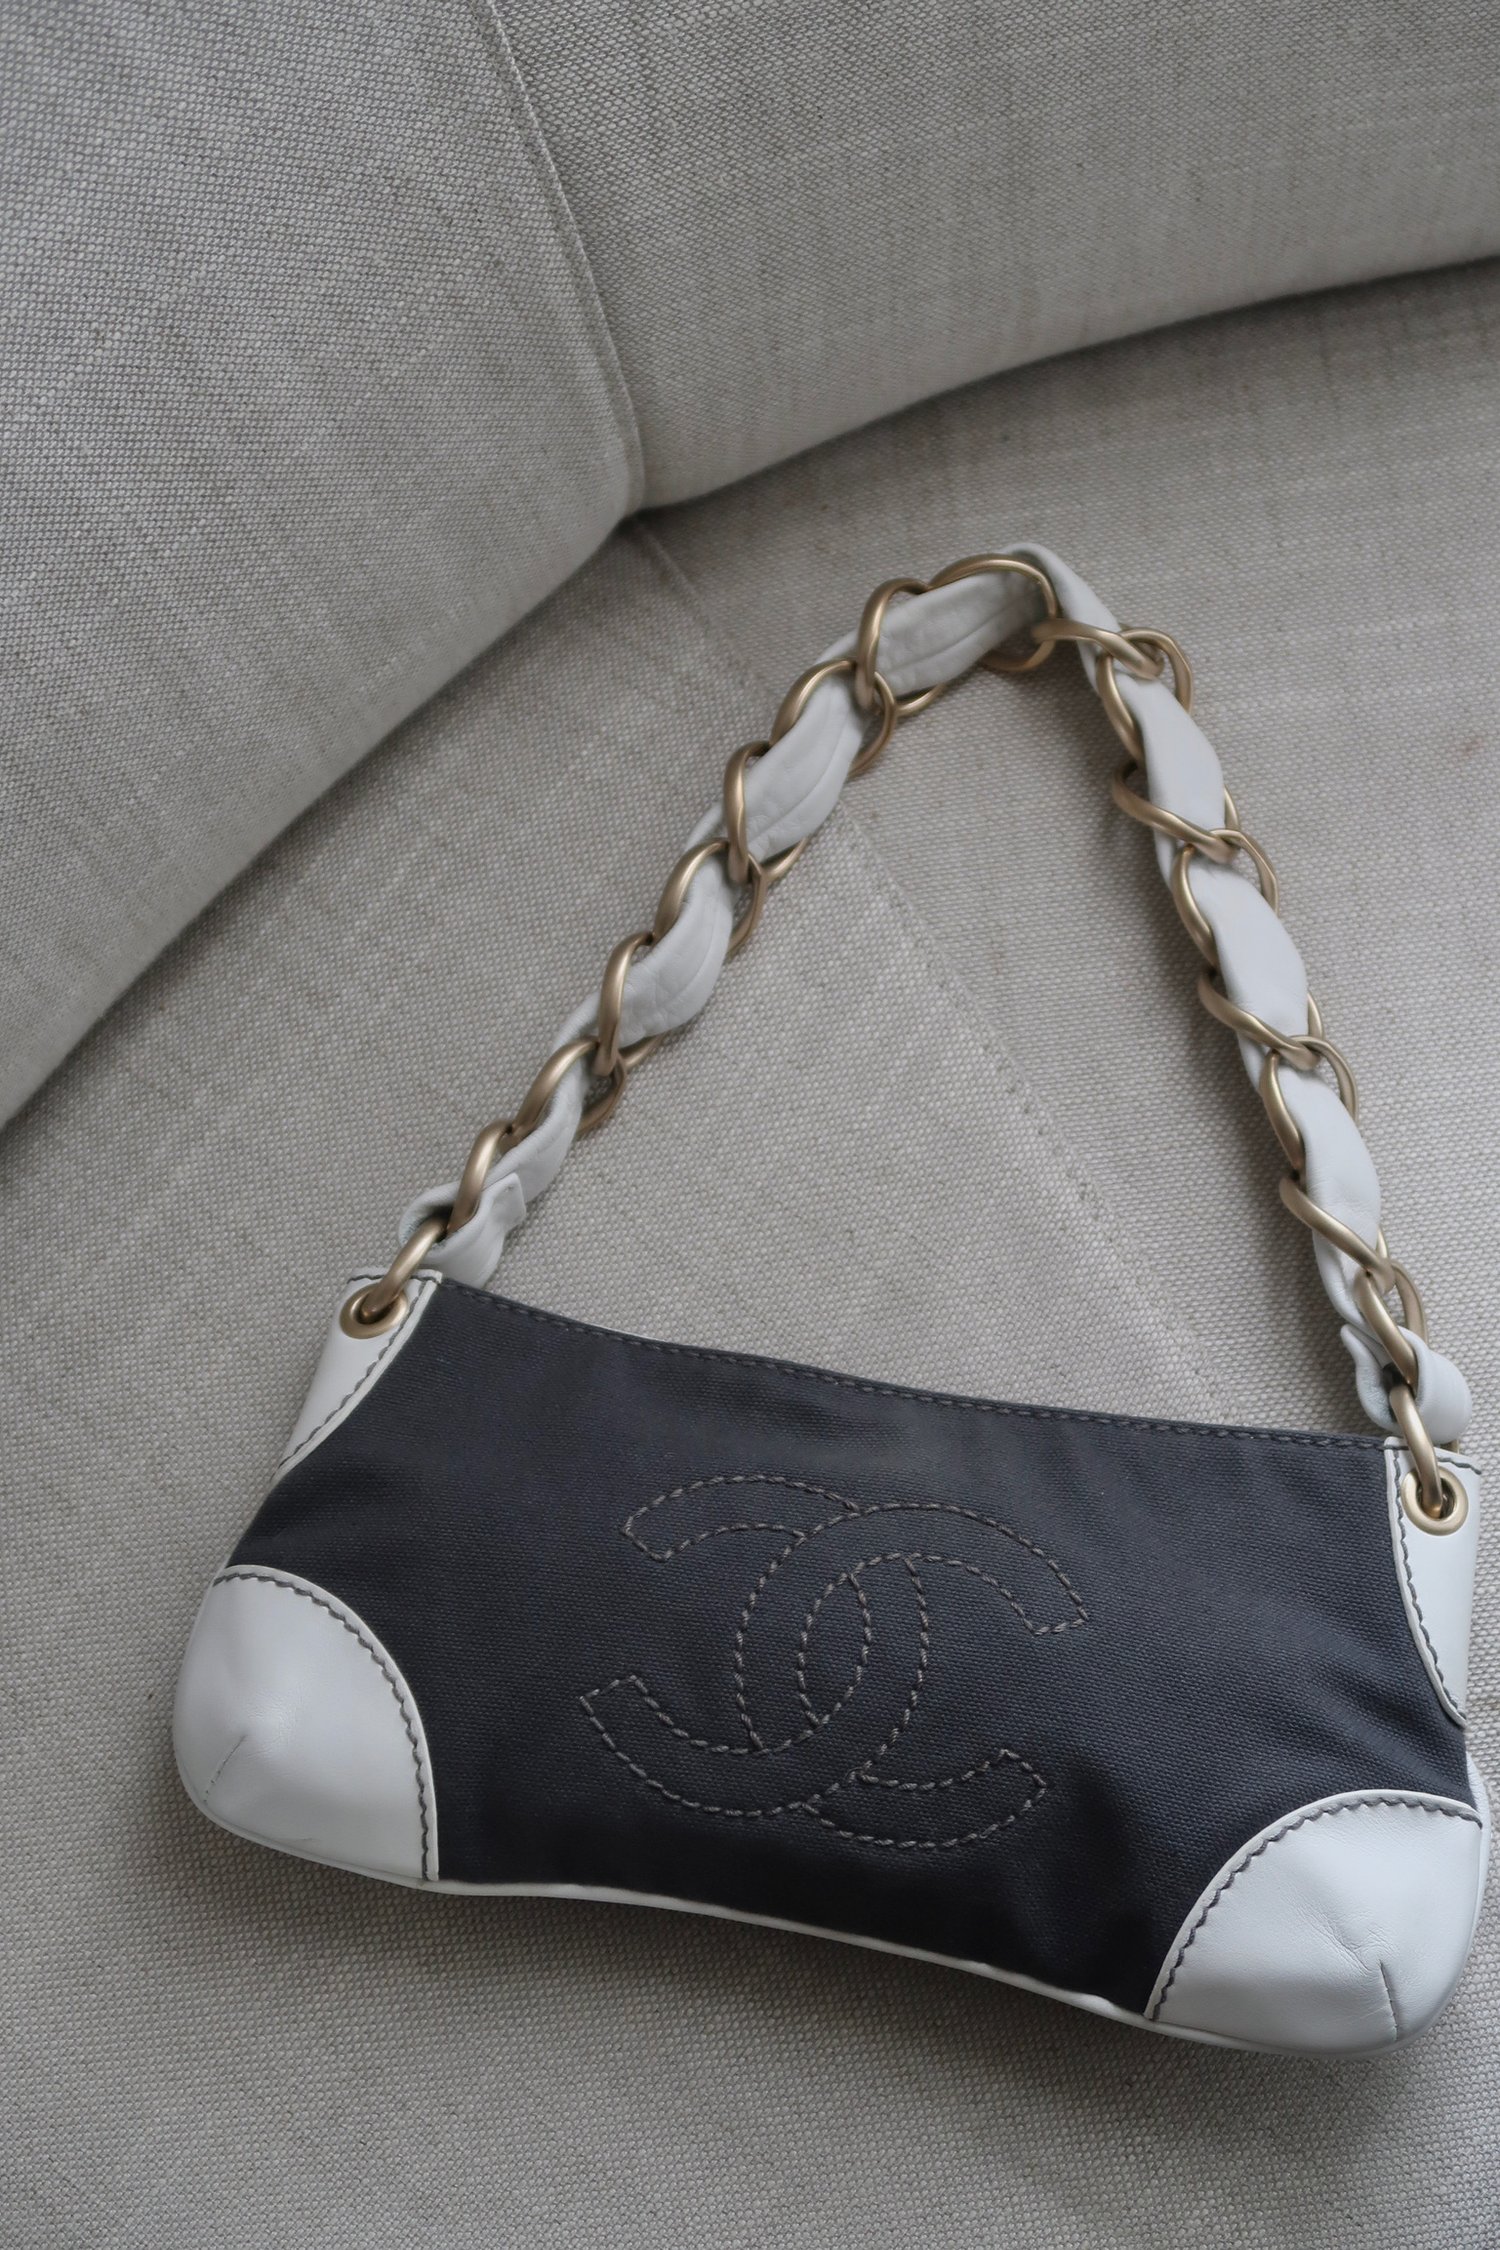 Chanel Black Canvas and White Leather Olsen CC Stitching Shoulder Bag